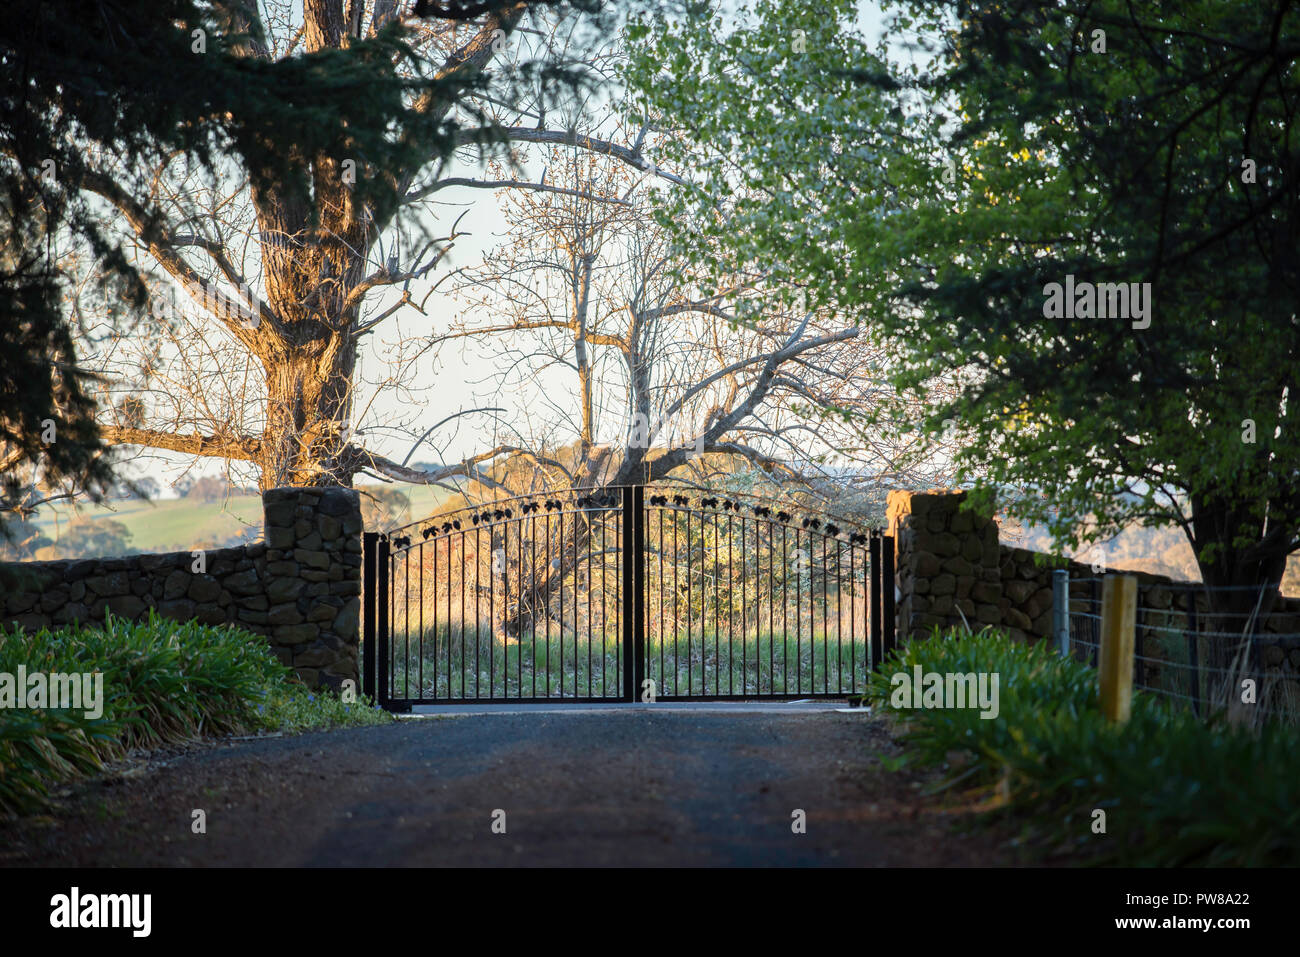 A gravel driveway leading to a dry stone wall and steel double gate entrance at rural a property near Orange in New South Wales, Australia Stock Photo